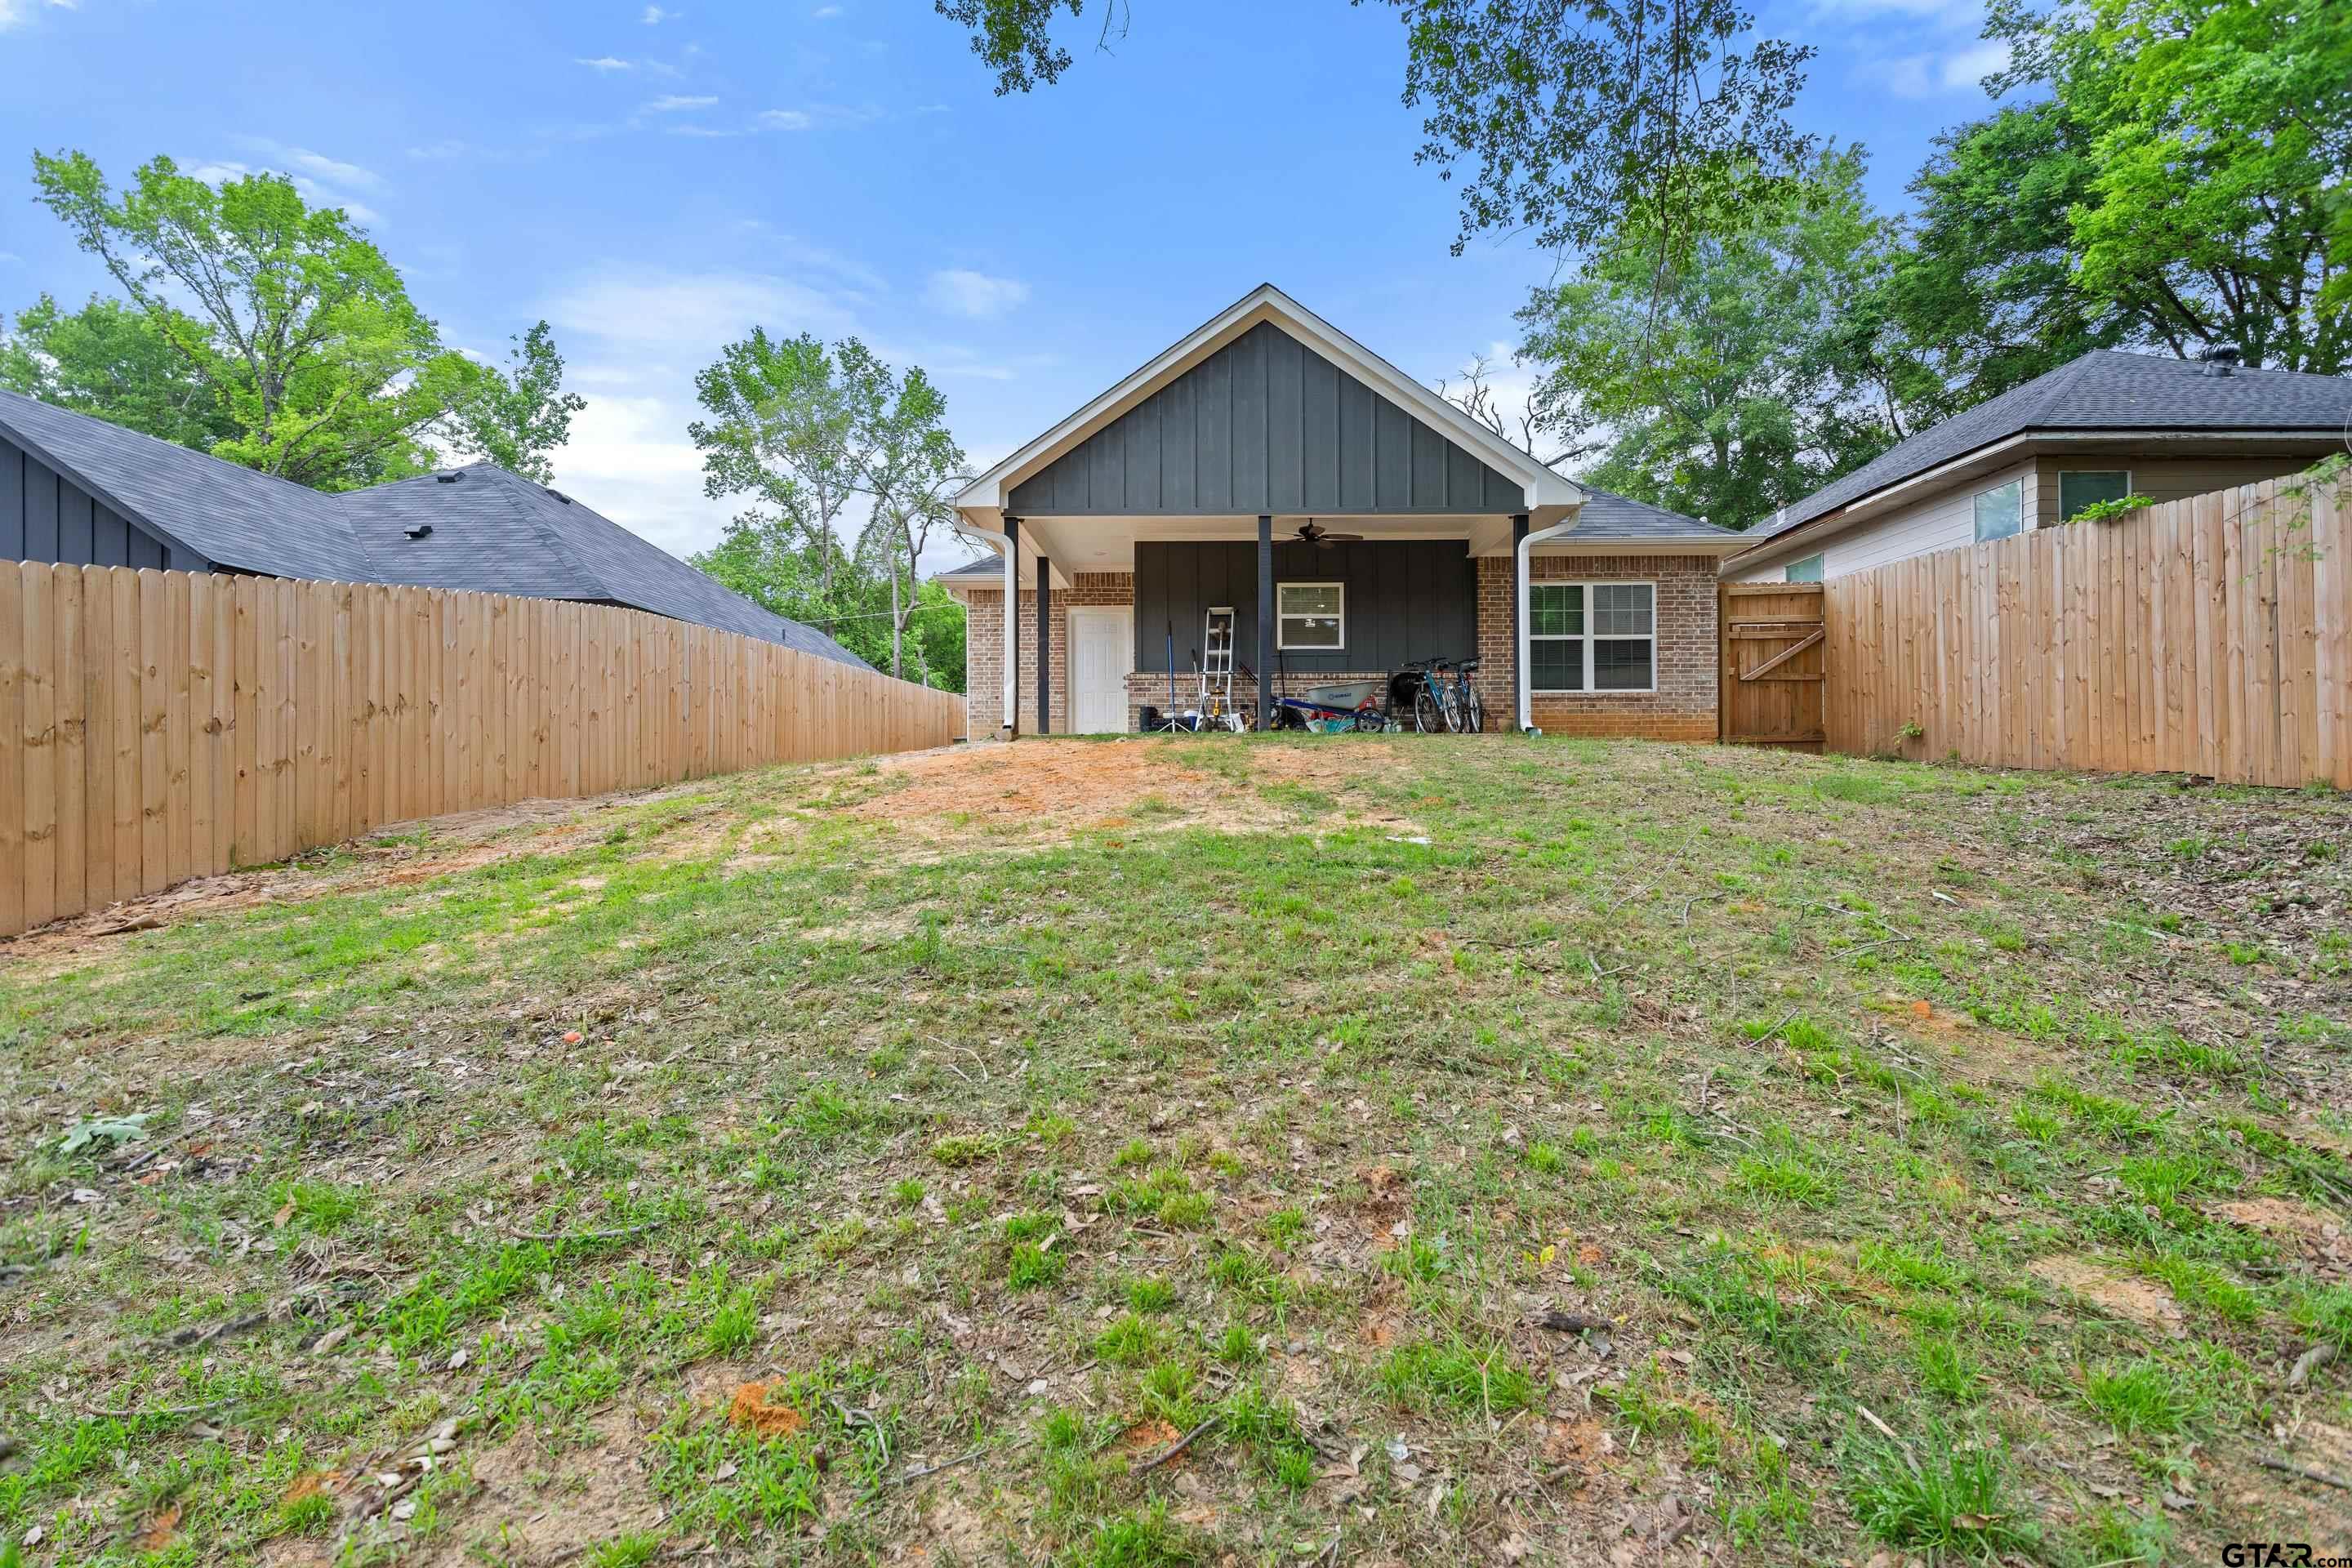 1302 30th, Tyler, Texas 75702, 3 Bedrooms Bedrooms, ,2 BathroomsBathrooms,Single Family Detached,For Sale,30th,24005336